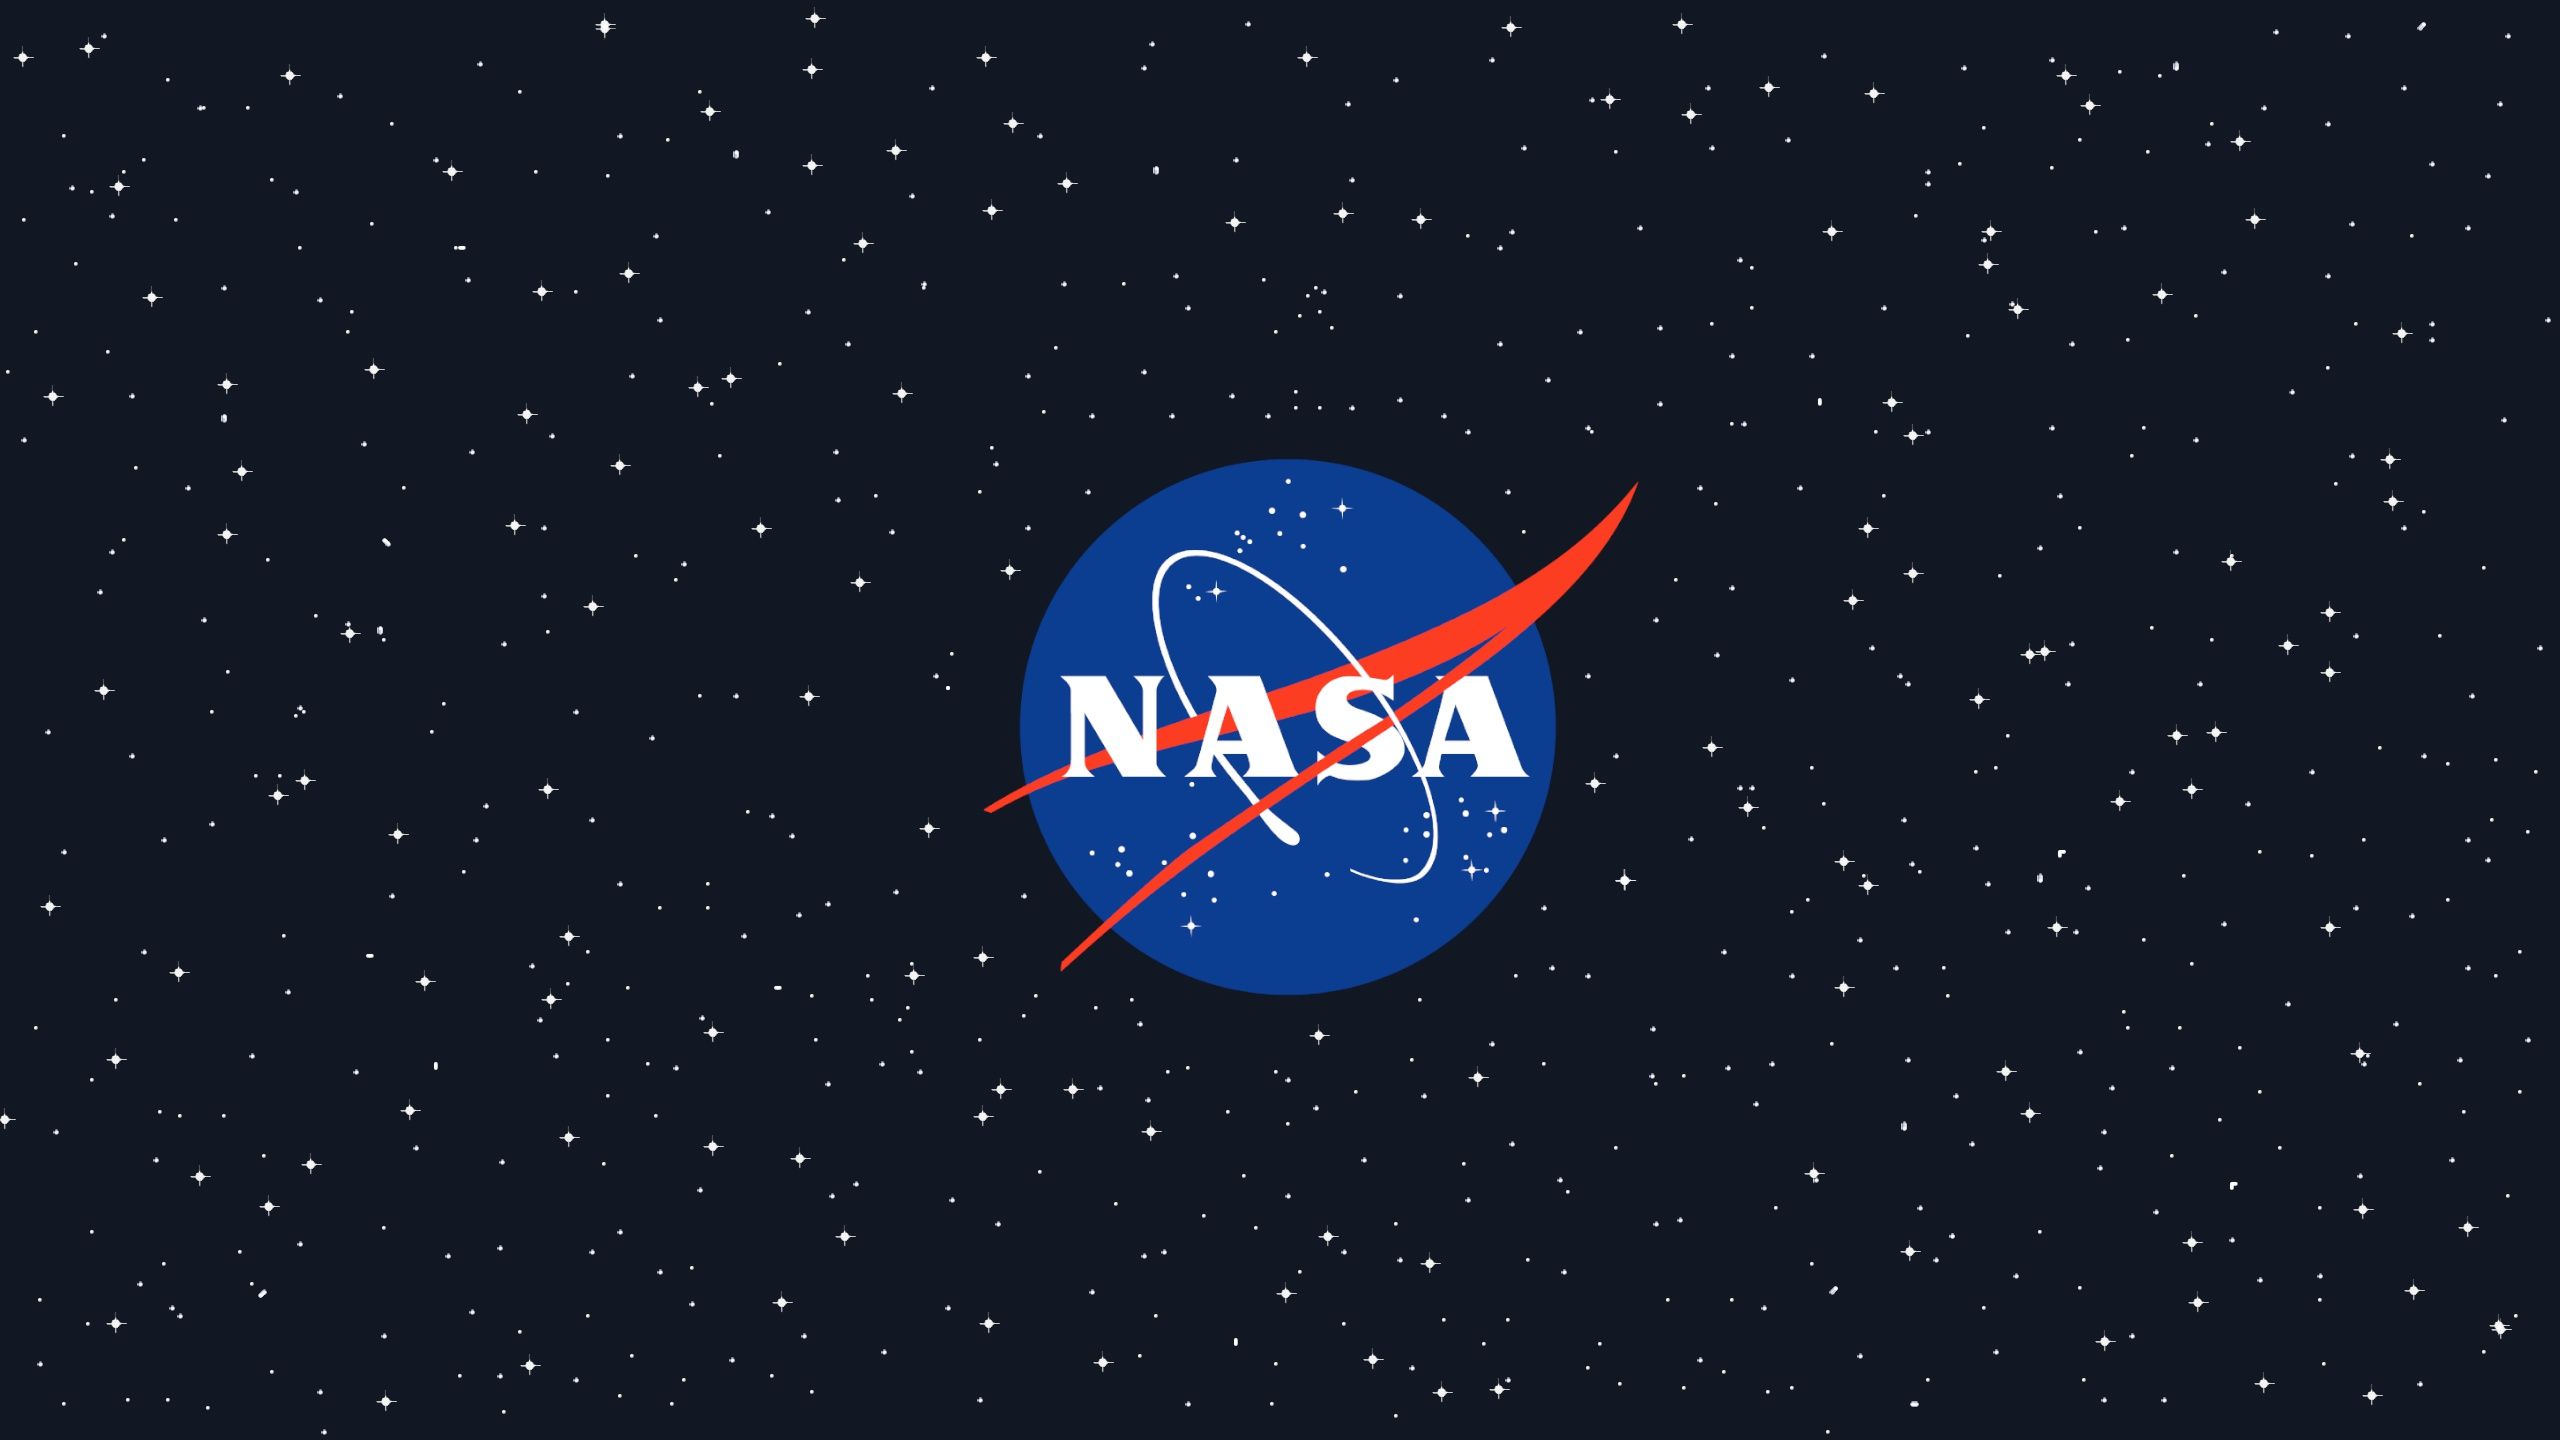 Download wallpaper space, nasa, nasa logo, section space in resolution 2560x1440